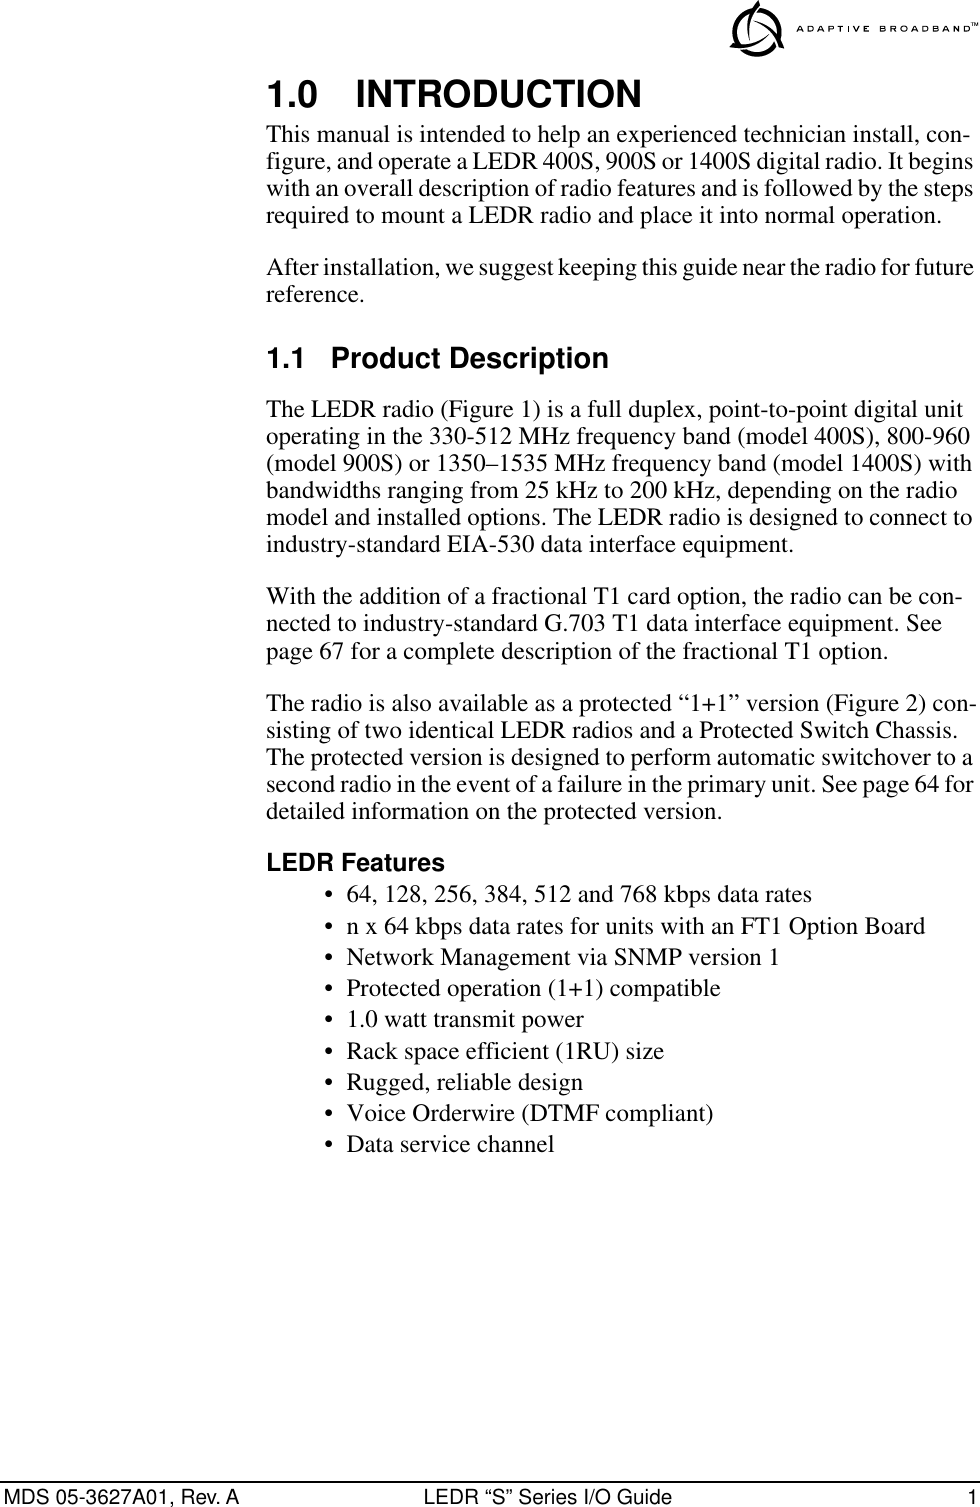  MDS 05-3627A01, Rev. A LEDR “S” Series I/O Guide 1 1.0 INTRODUCTION This manual is intended to help an experienced technician install, con-figure, and operate a LEDR 400S, 900S or 1400S digital radio. It begins with an overall description of radio features and is followed by the steps required to mount a LEDR radio and place it into normal operation.After installation, we suggest keeping this guide near the radio for future reference. 1.1 Product Description The LEDR radio (Figure 1) is a full duplex, point-to-point digital unit operating in the 330-512 MHz frequency band (model 400S), 800-960 (model 900S) or 1350–1535 MHz frequency band (model 1400S) with bandwidths ranging from 25 kHz to 200 kHz, depending on the radio model and installed options. The LEDR radio is designed to connect to industry-standard EIA-530 data interface equipment. With the addition of a fractional T1 card option, the radio can be con-nected to industry-standard G.703 T1 data interface equipment. See page 67 for a complete description of the fractional T1 option.The radio is also available as a protected “1+1” version (Figure 2) con-sisting of two identical LEDR radios and a Protected Switch Chassis. The protected version is designed to perform automatic switchover to a second radio in the event of a failure in the primary unit. See page 64 for detailed information on the protected version. LEDR Features • 64, 128, 256, 384, 512 and 768 kbps data rates• n x 64 kbps data rates for units with an FT1 Option Board• Network Management via SNMP version 1• Protected operation (1+1) compatible• 1.0 watt transmit power• Rack space efficient (1RU) size • Rugged, reliable design• Voice Orderwire (DTMF compliant)• Data service channel